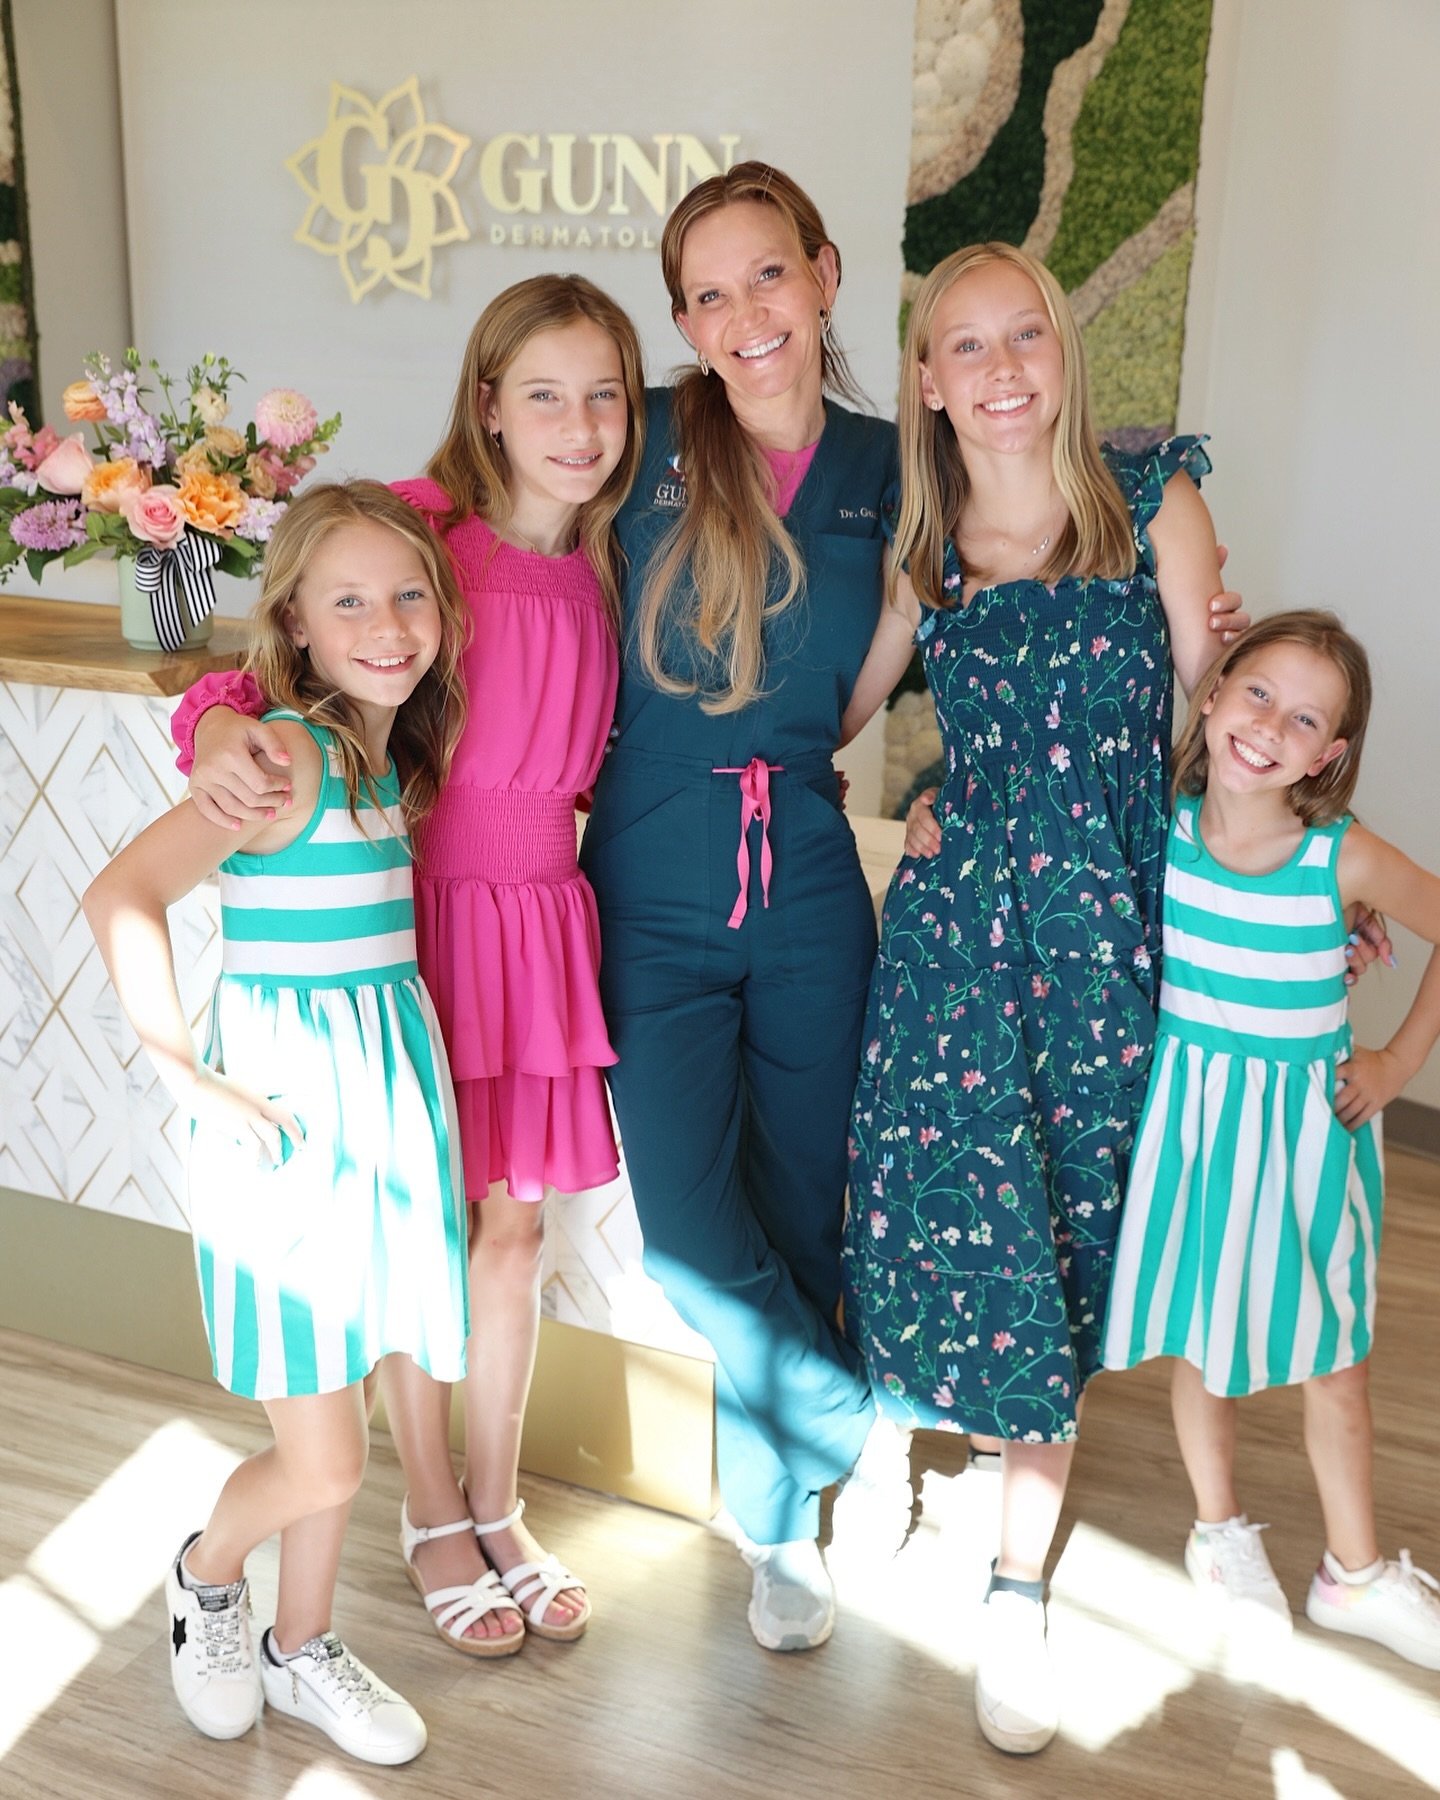 Happy Mother&rsquo;s Day from Dr. Gunn and her four beautiful daughters! 💖💐✨🫶

At Gunn Dermatology we have so many incredible moms on our staff that bring their compassion, love and nurturing spirits to everything that they do! Thank you for bring